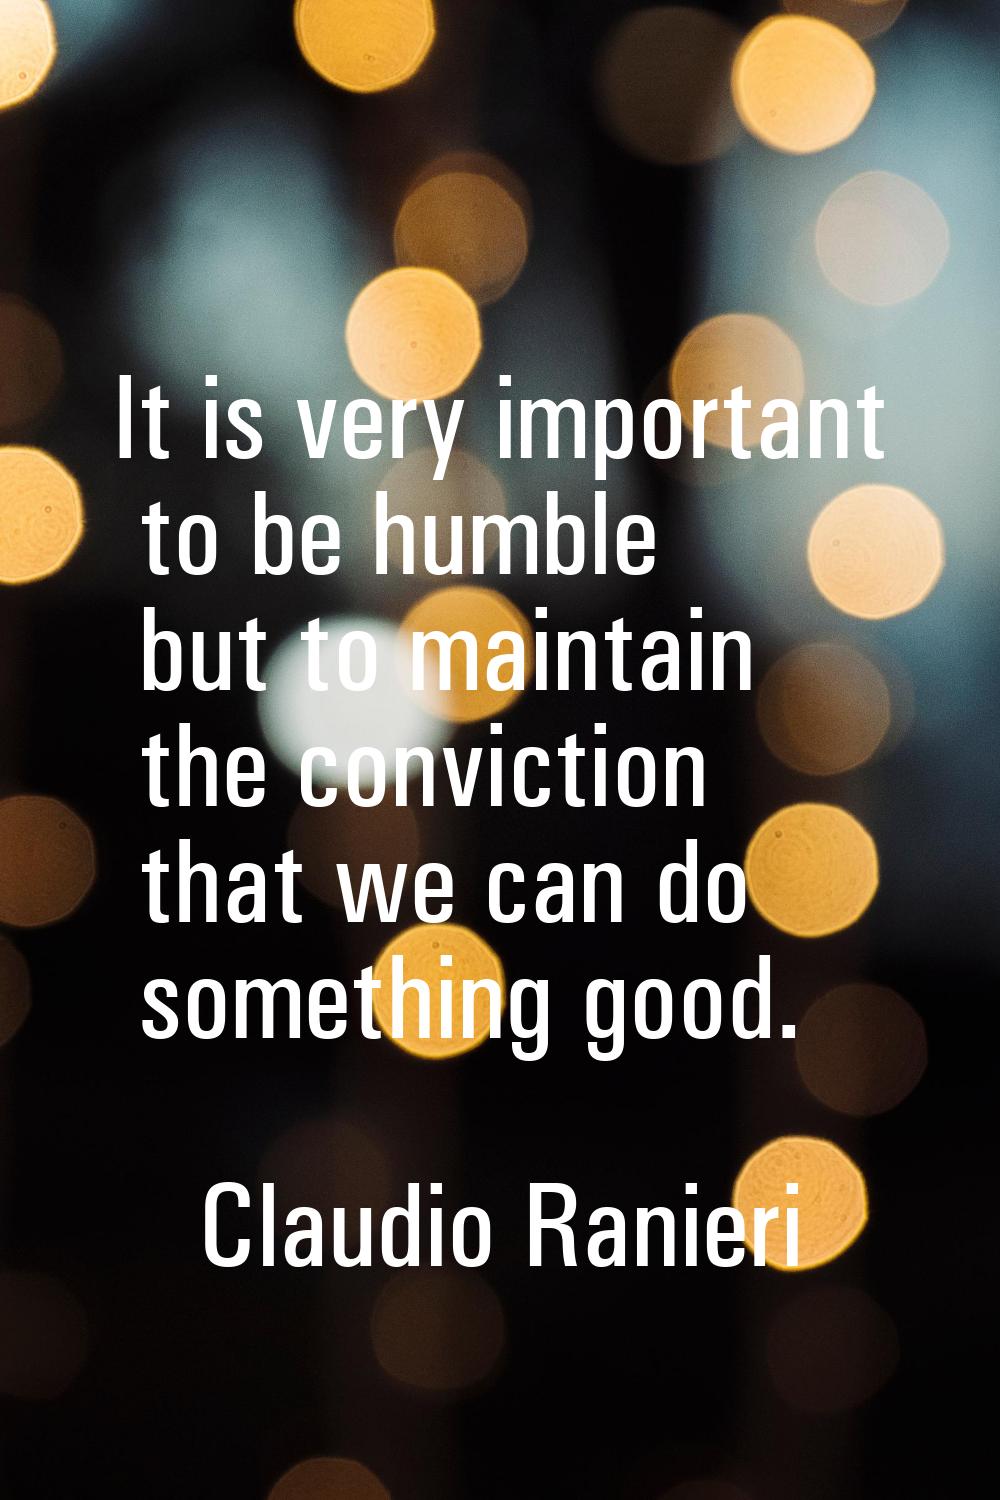 It is very important to be humble but to maintain the conviction that we can do something good.